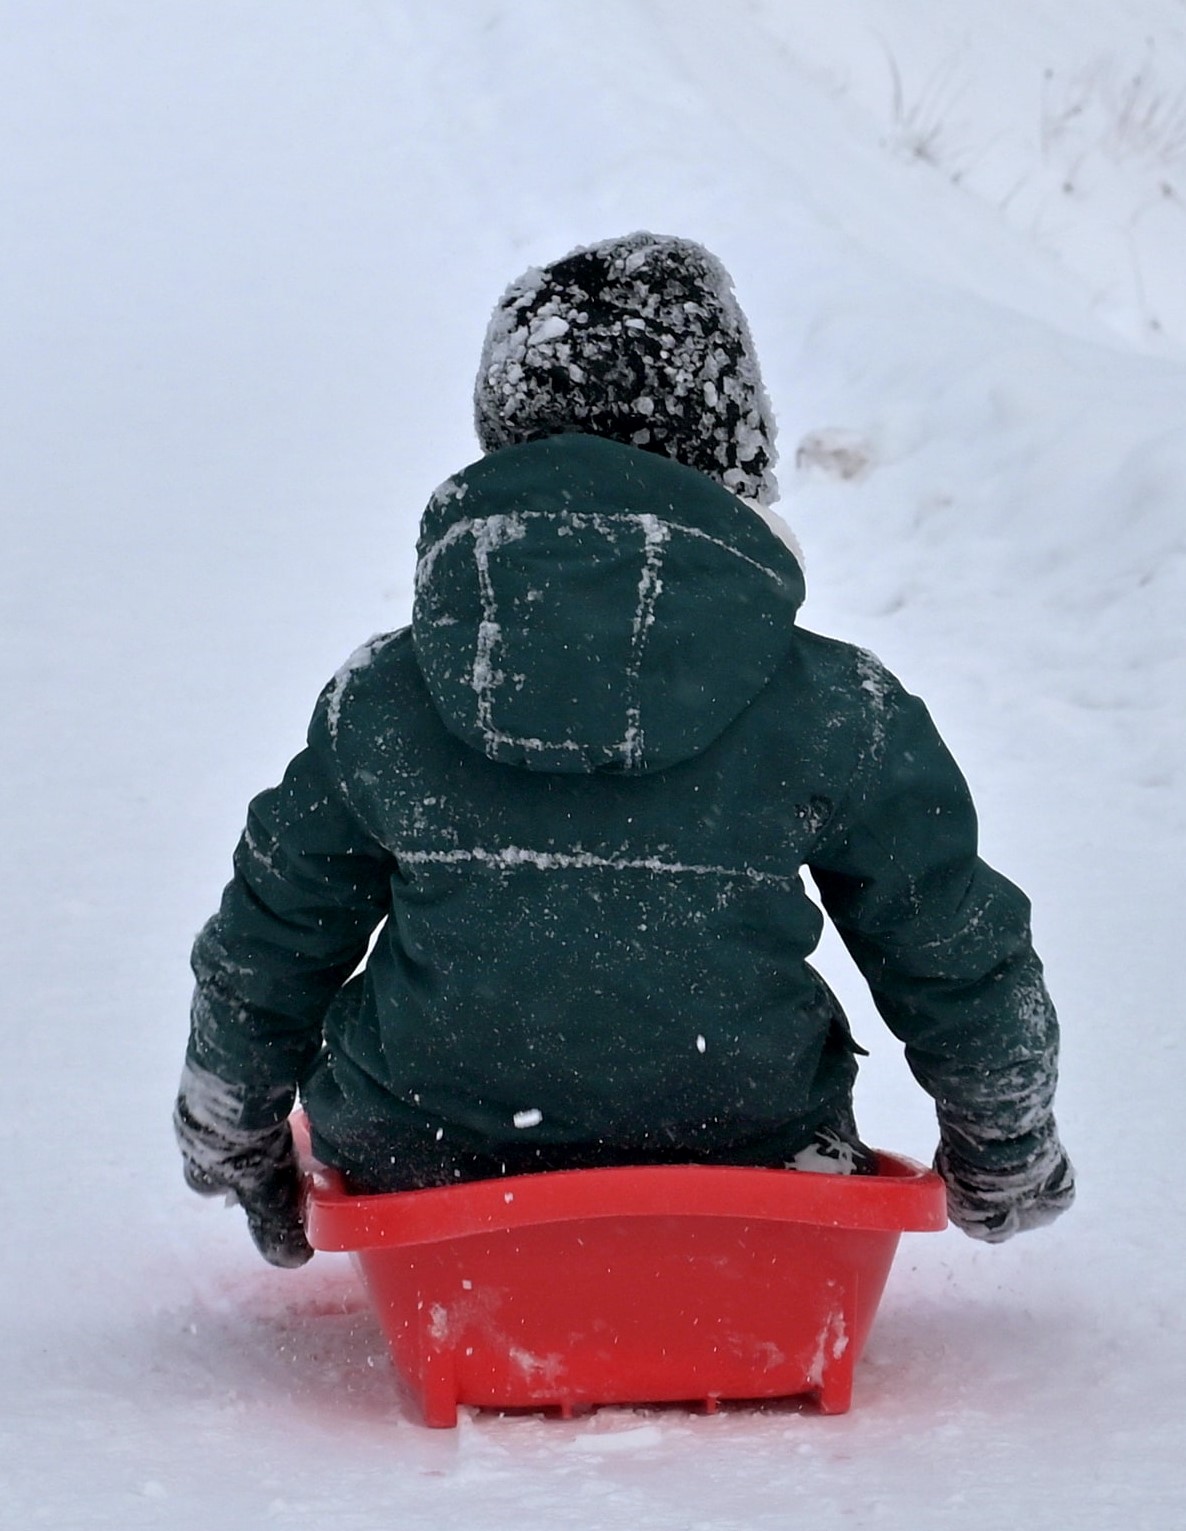 Back of child sitting on a sled in a snowy field.